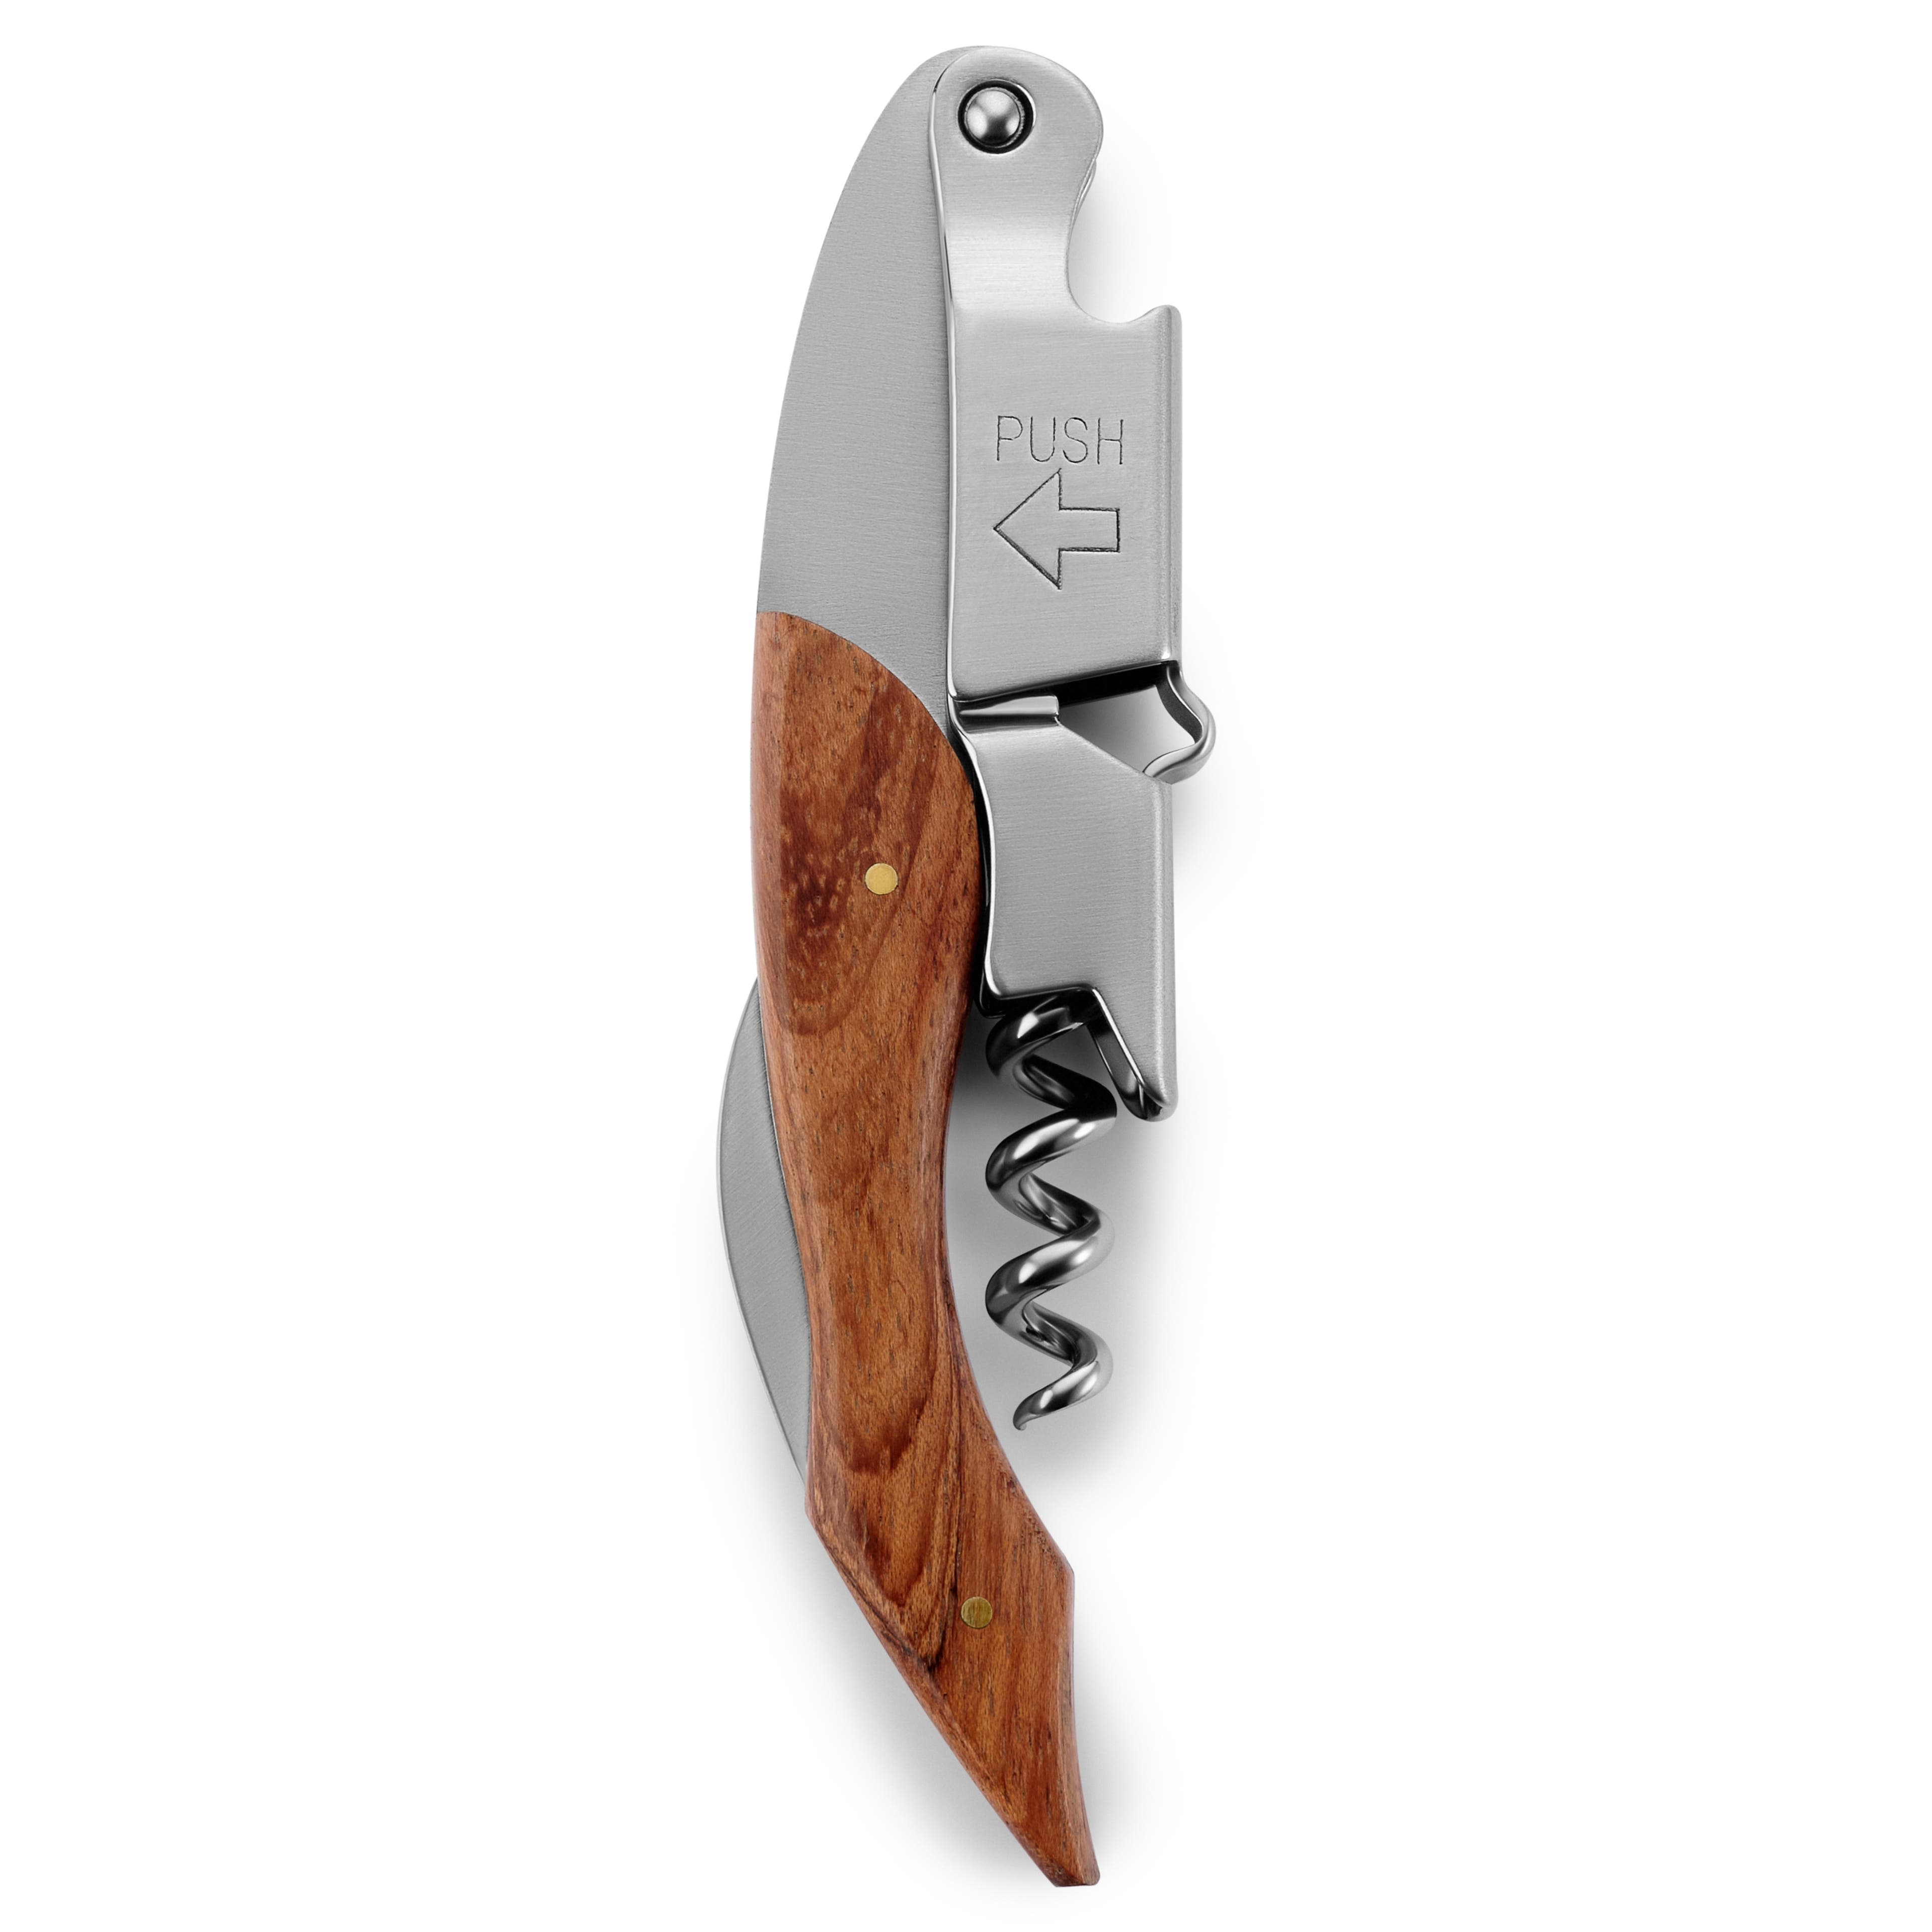 Deluxe Universal Wood and Stainless Steel Bottle Opener